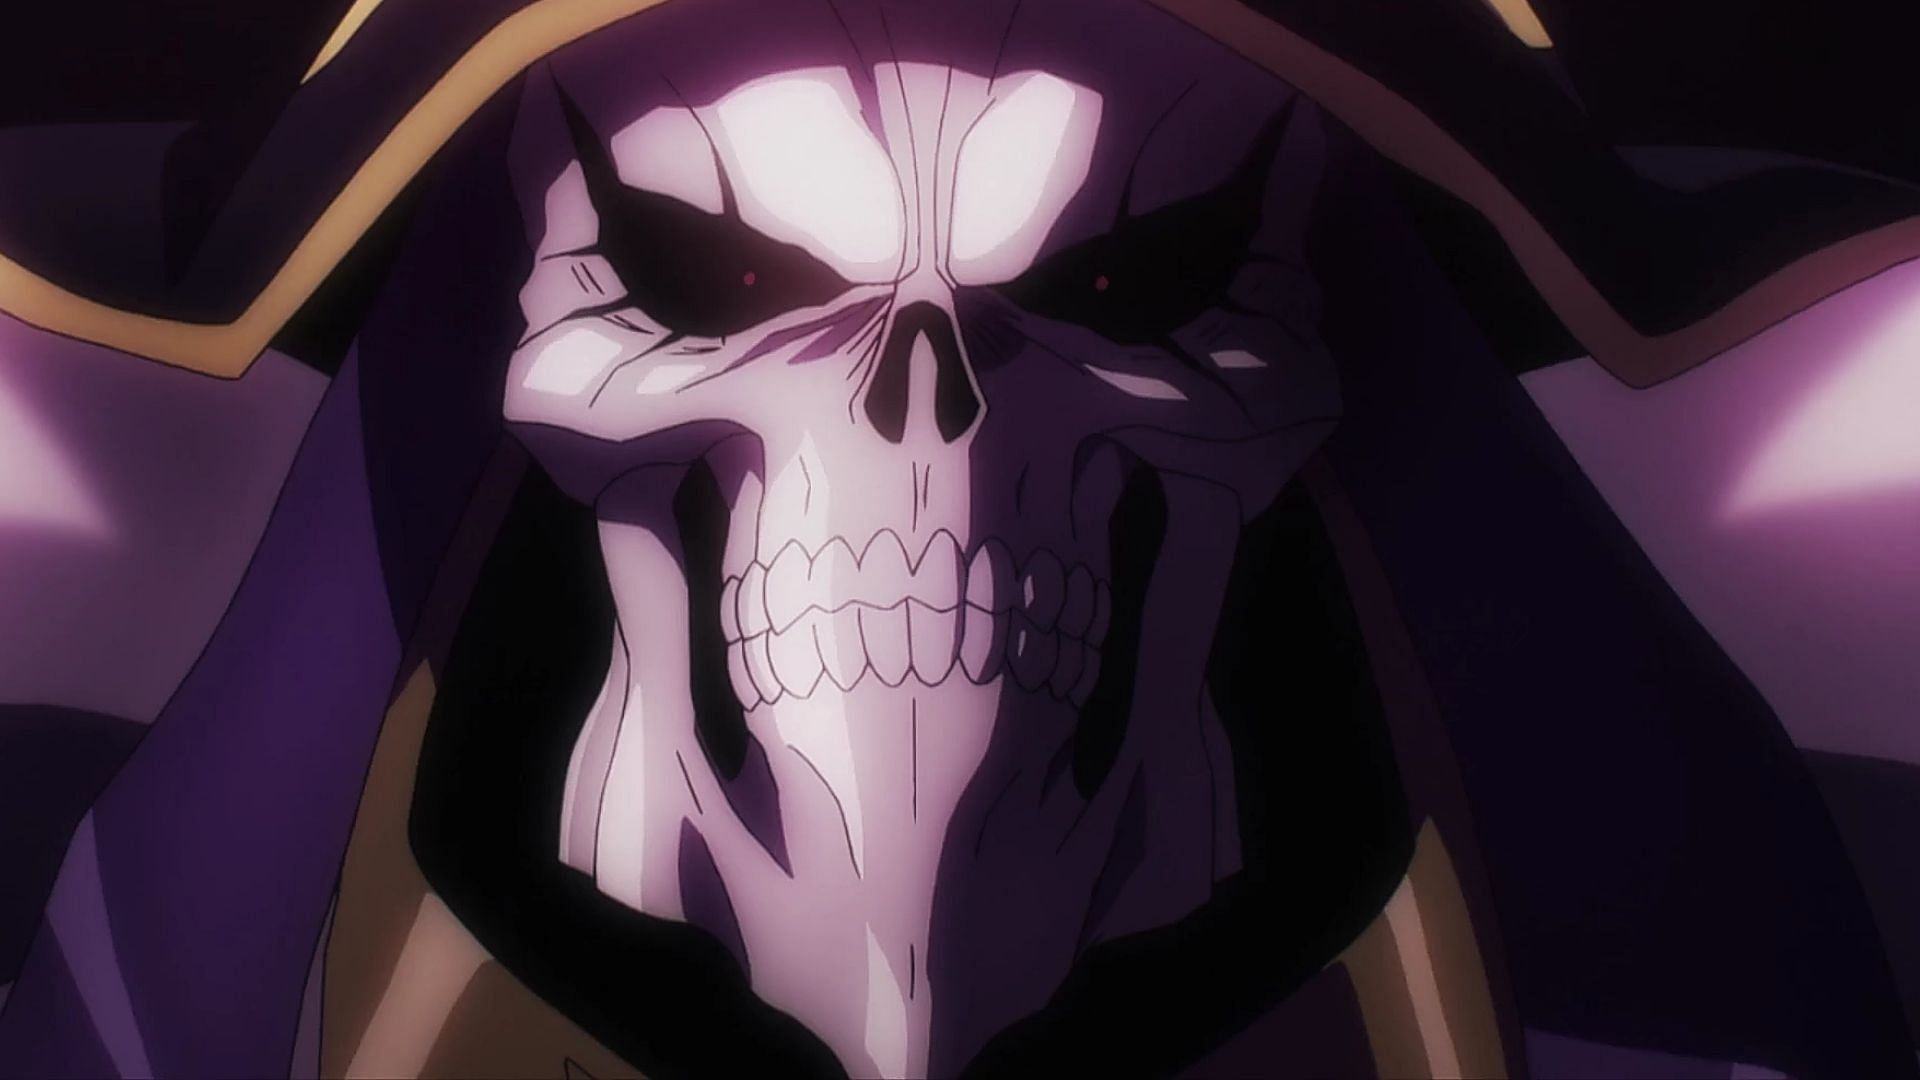 From Overlord (Image via Madhouse)